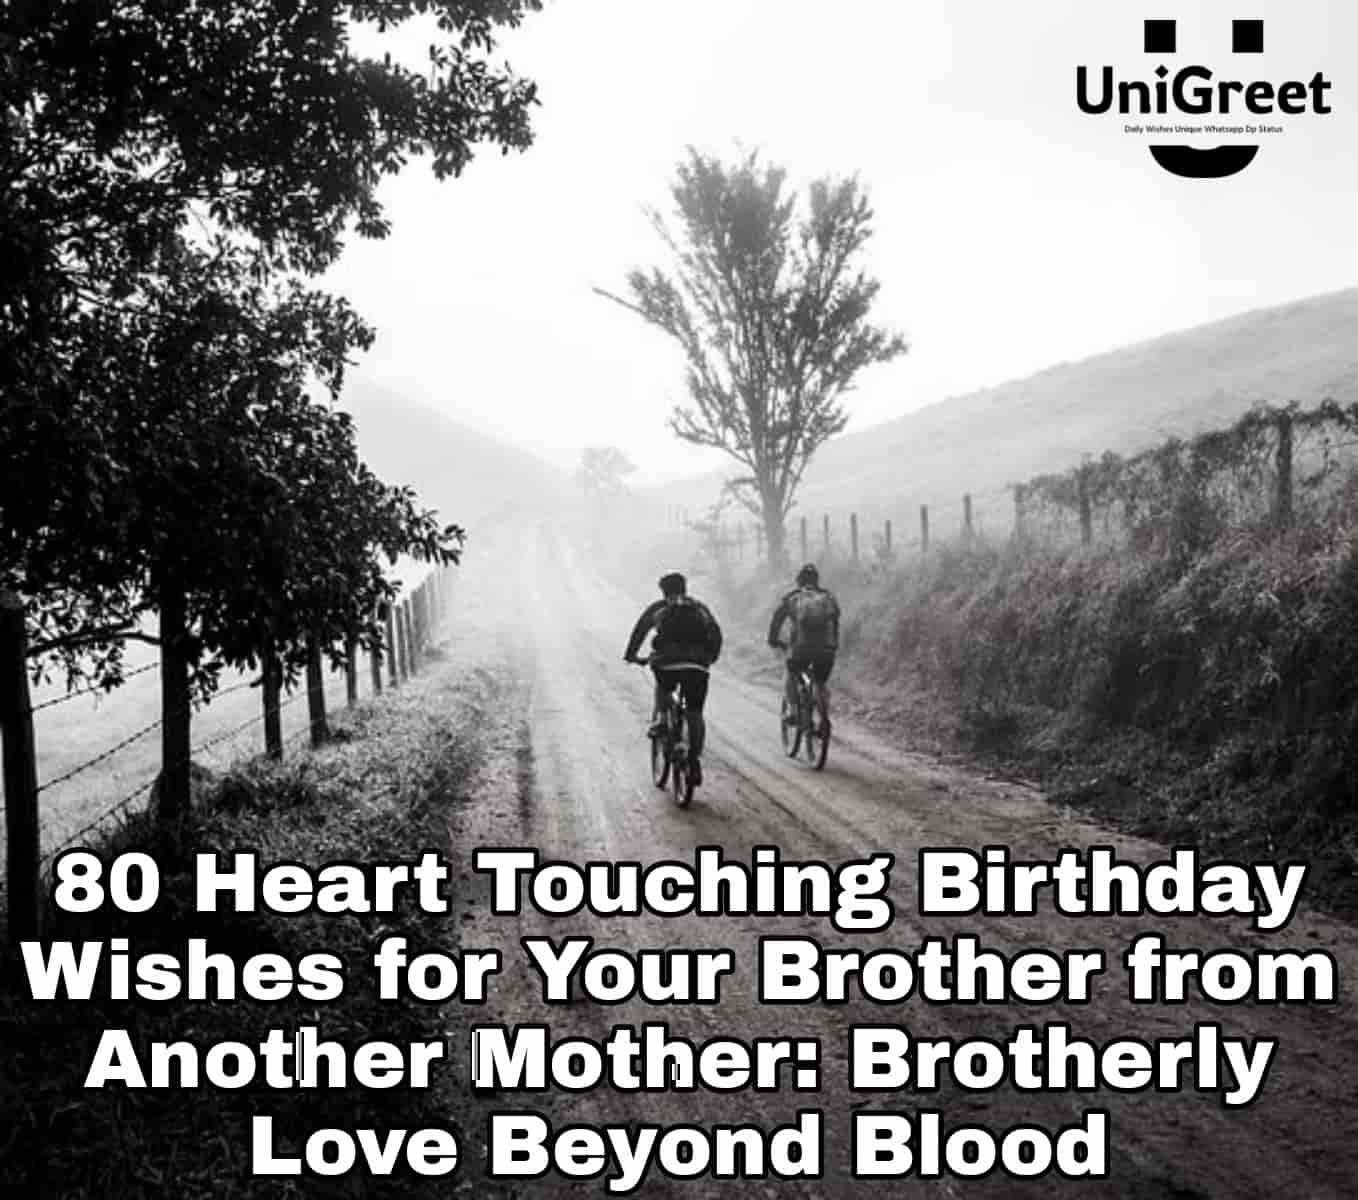 Heart touching birthday wishes for brother from another mother